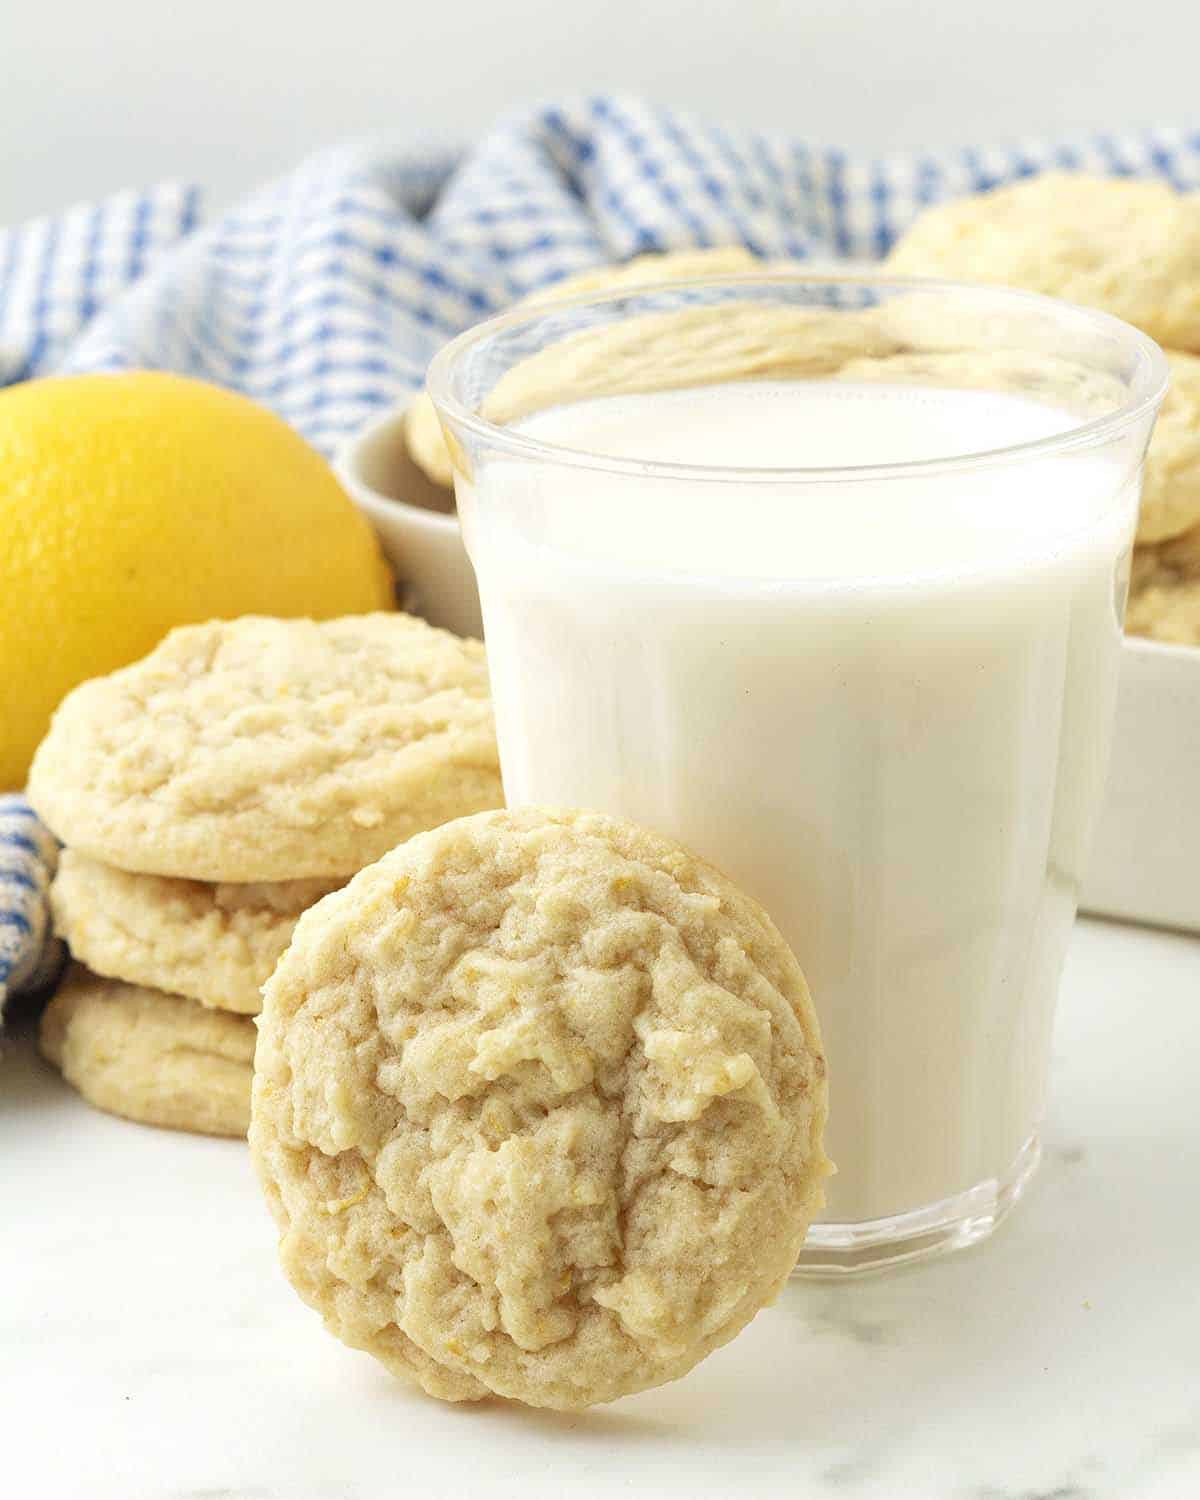 A lemon cookie leaning against a glass of almond milk.